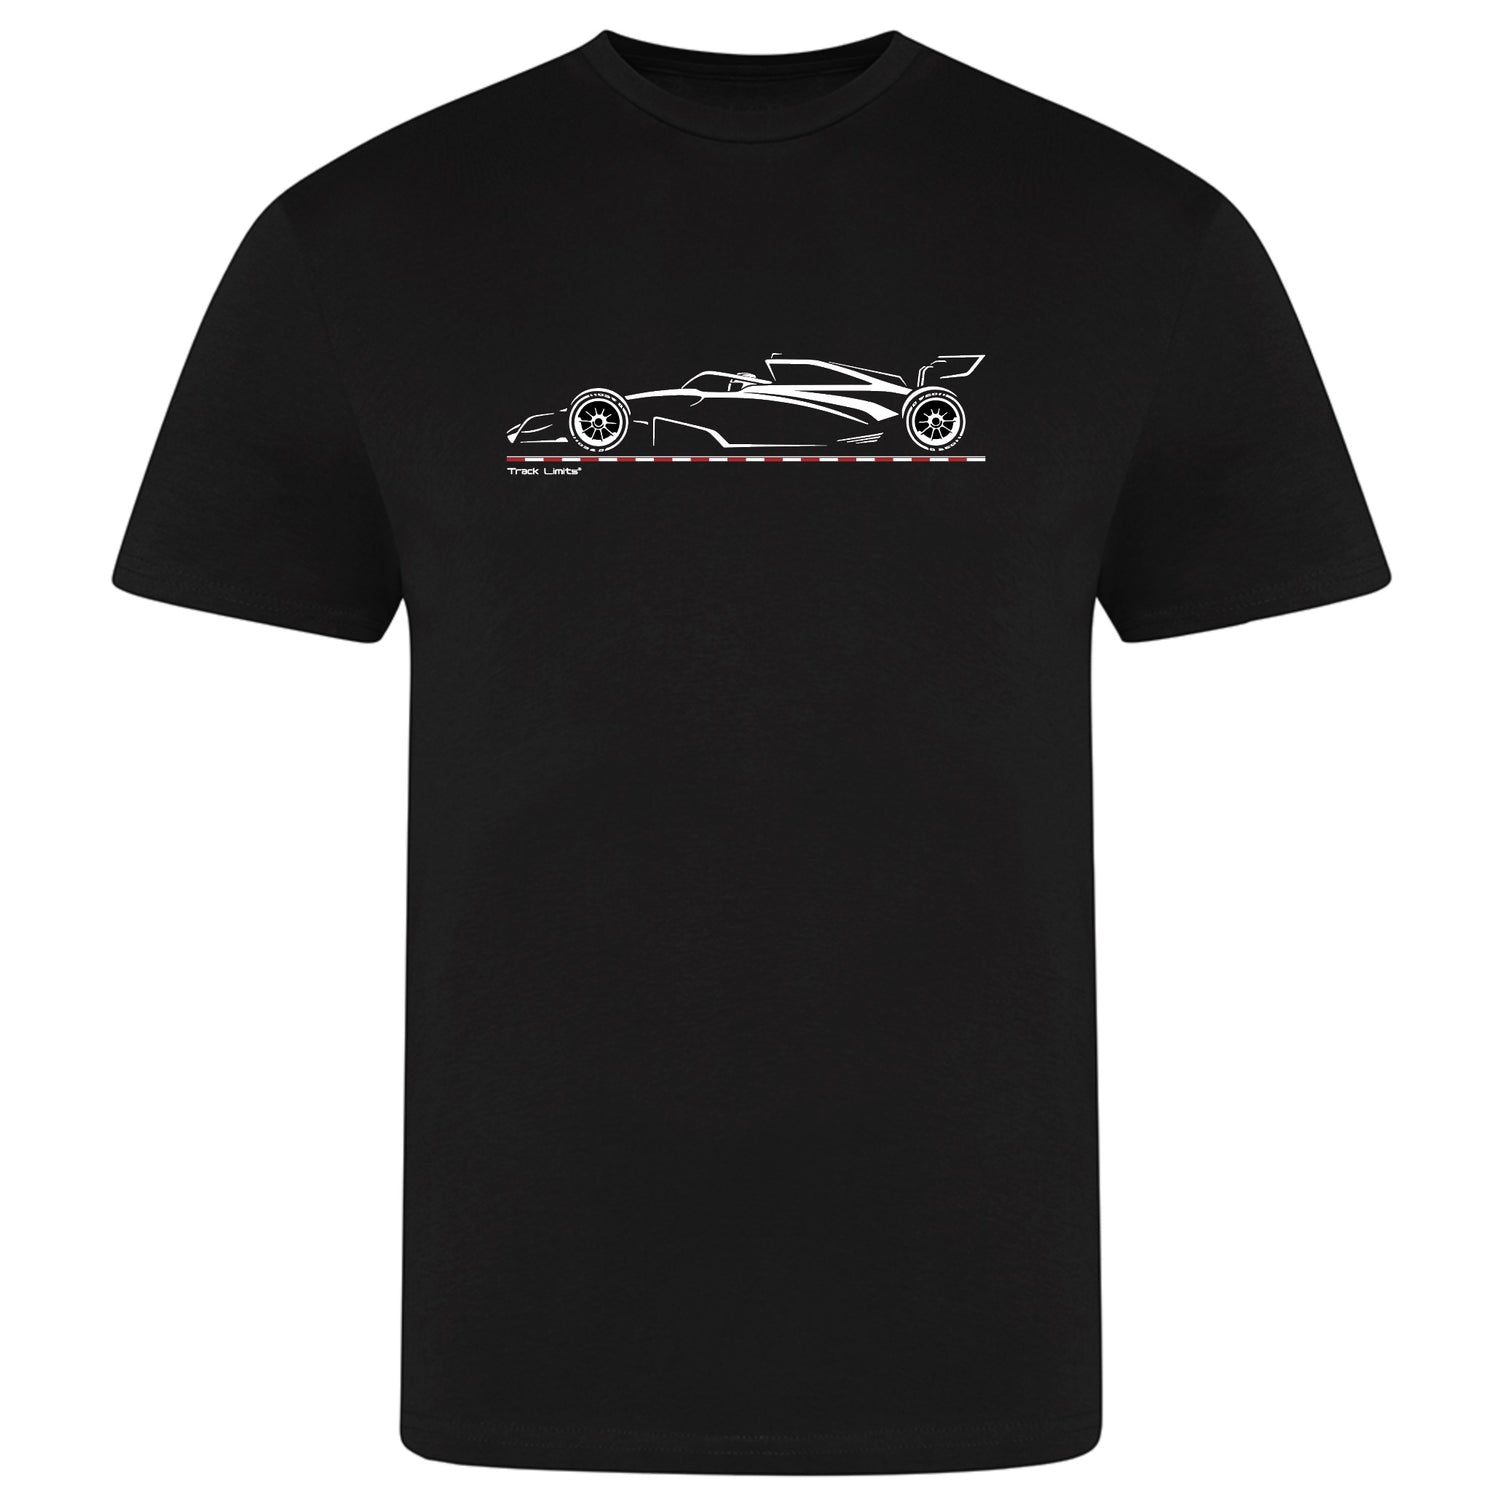 Track Limits F1 inspired graphic T-Shirt